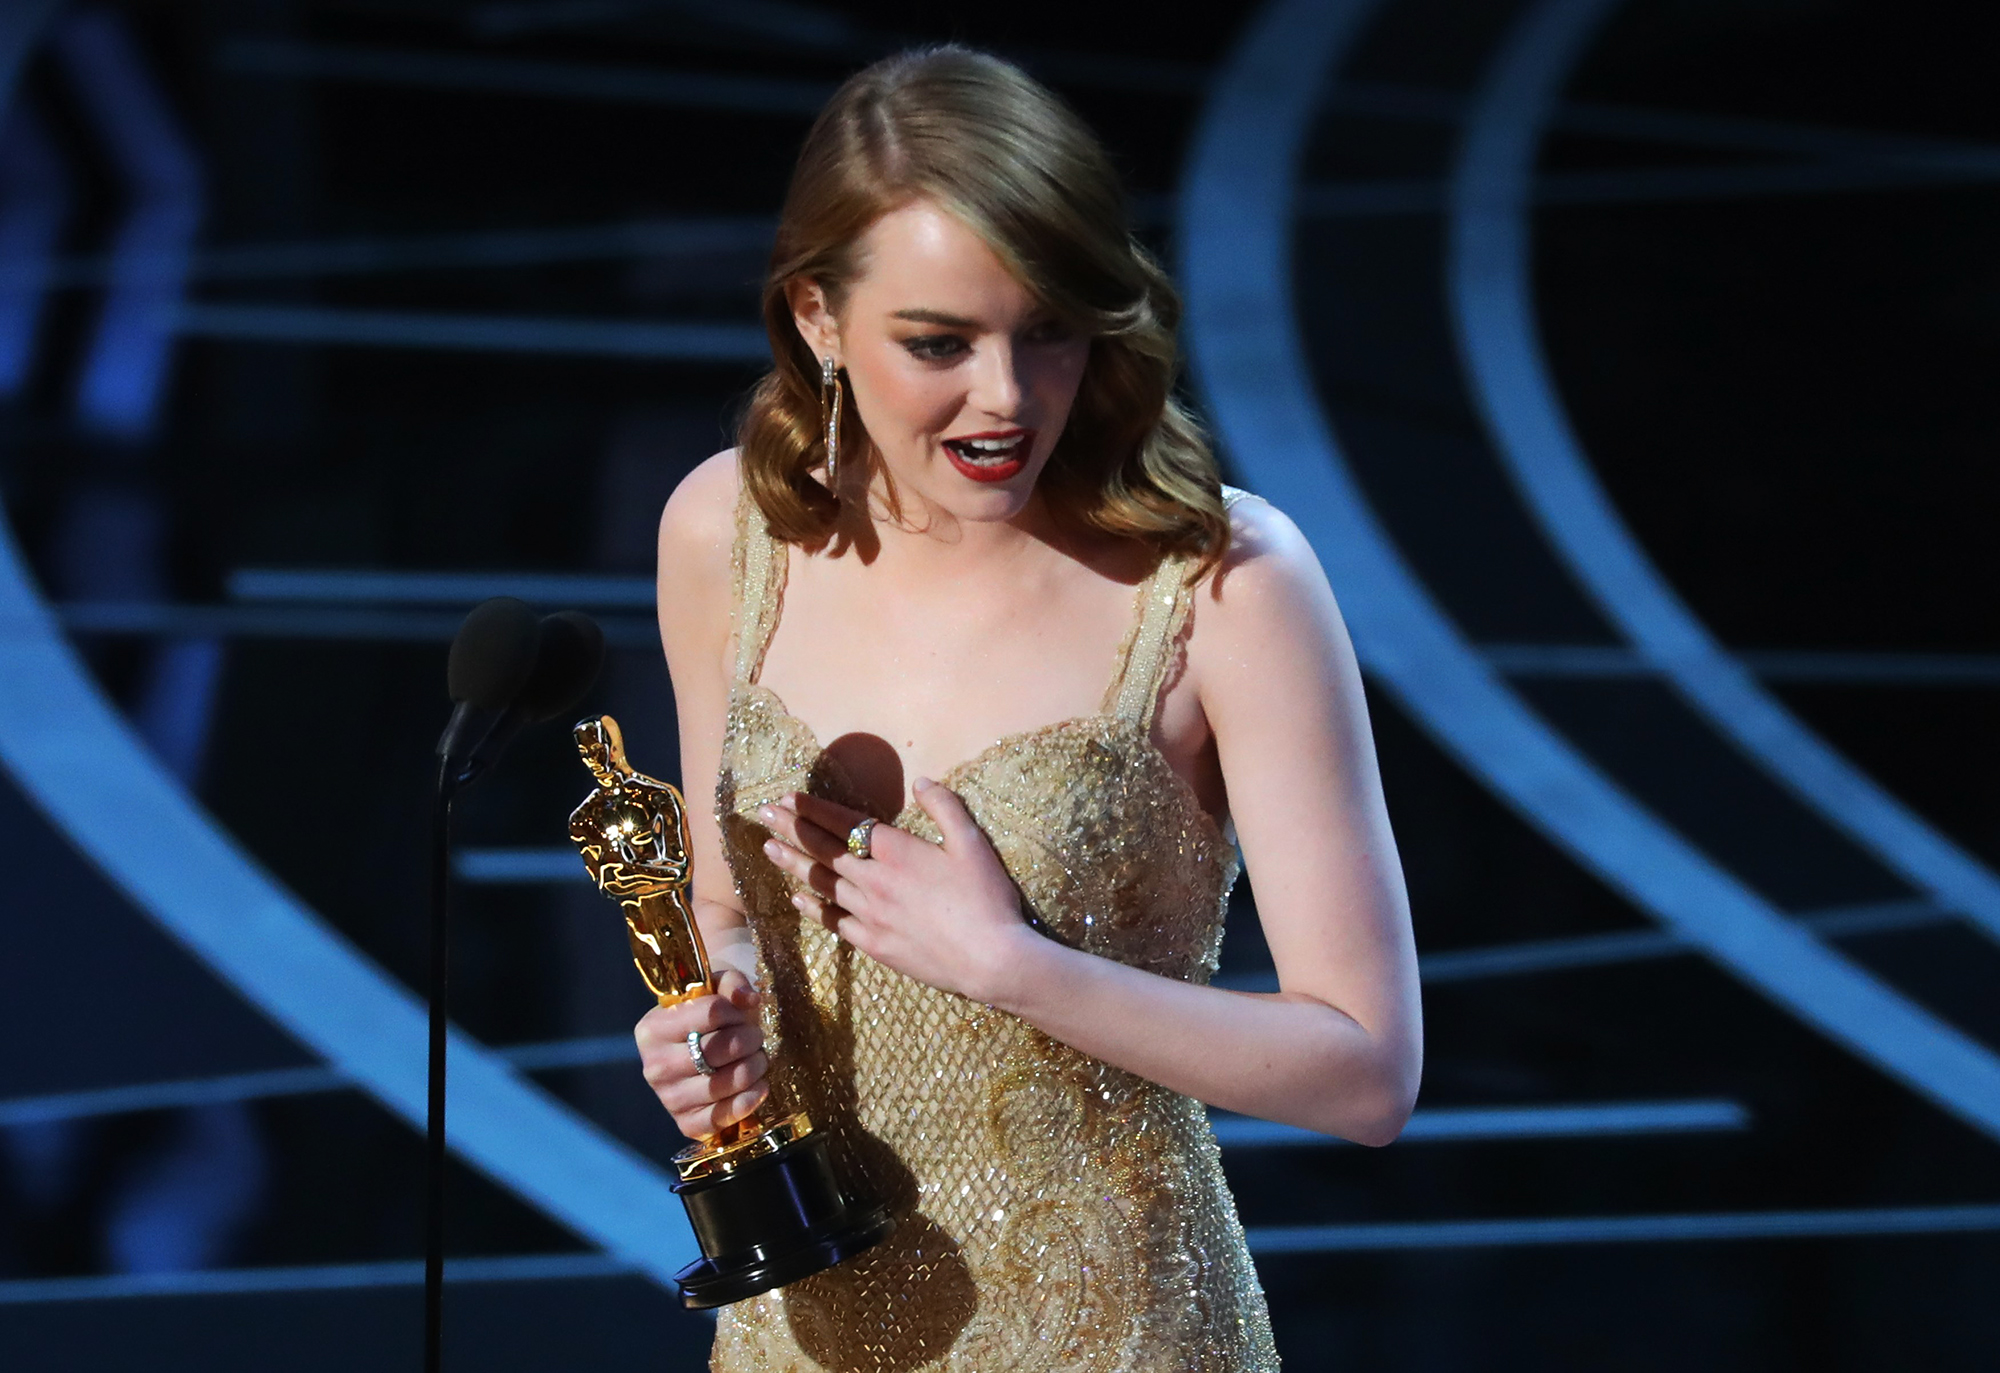 Best Actress winner Emma Stone accepts her award for La La Land, on Feb. 26, 2017 in Hollywood, Calif.